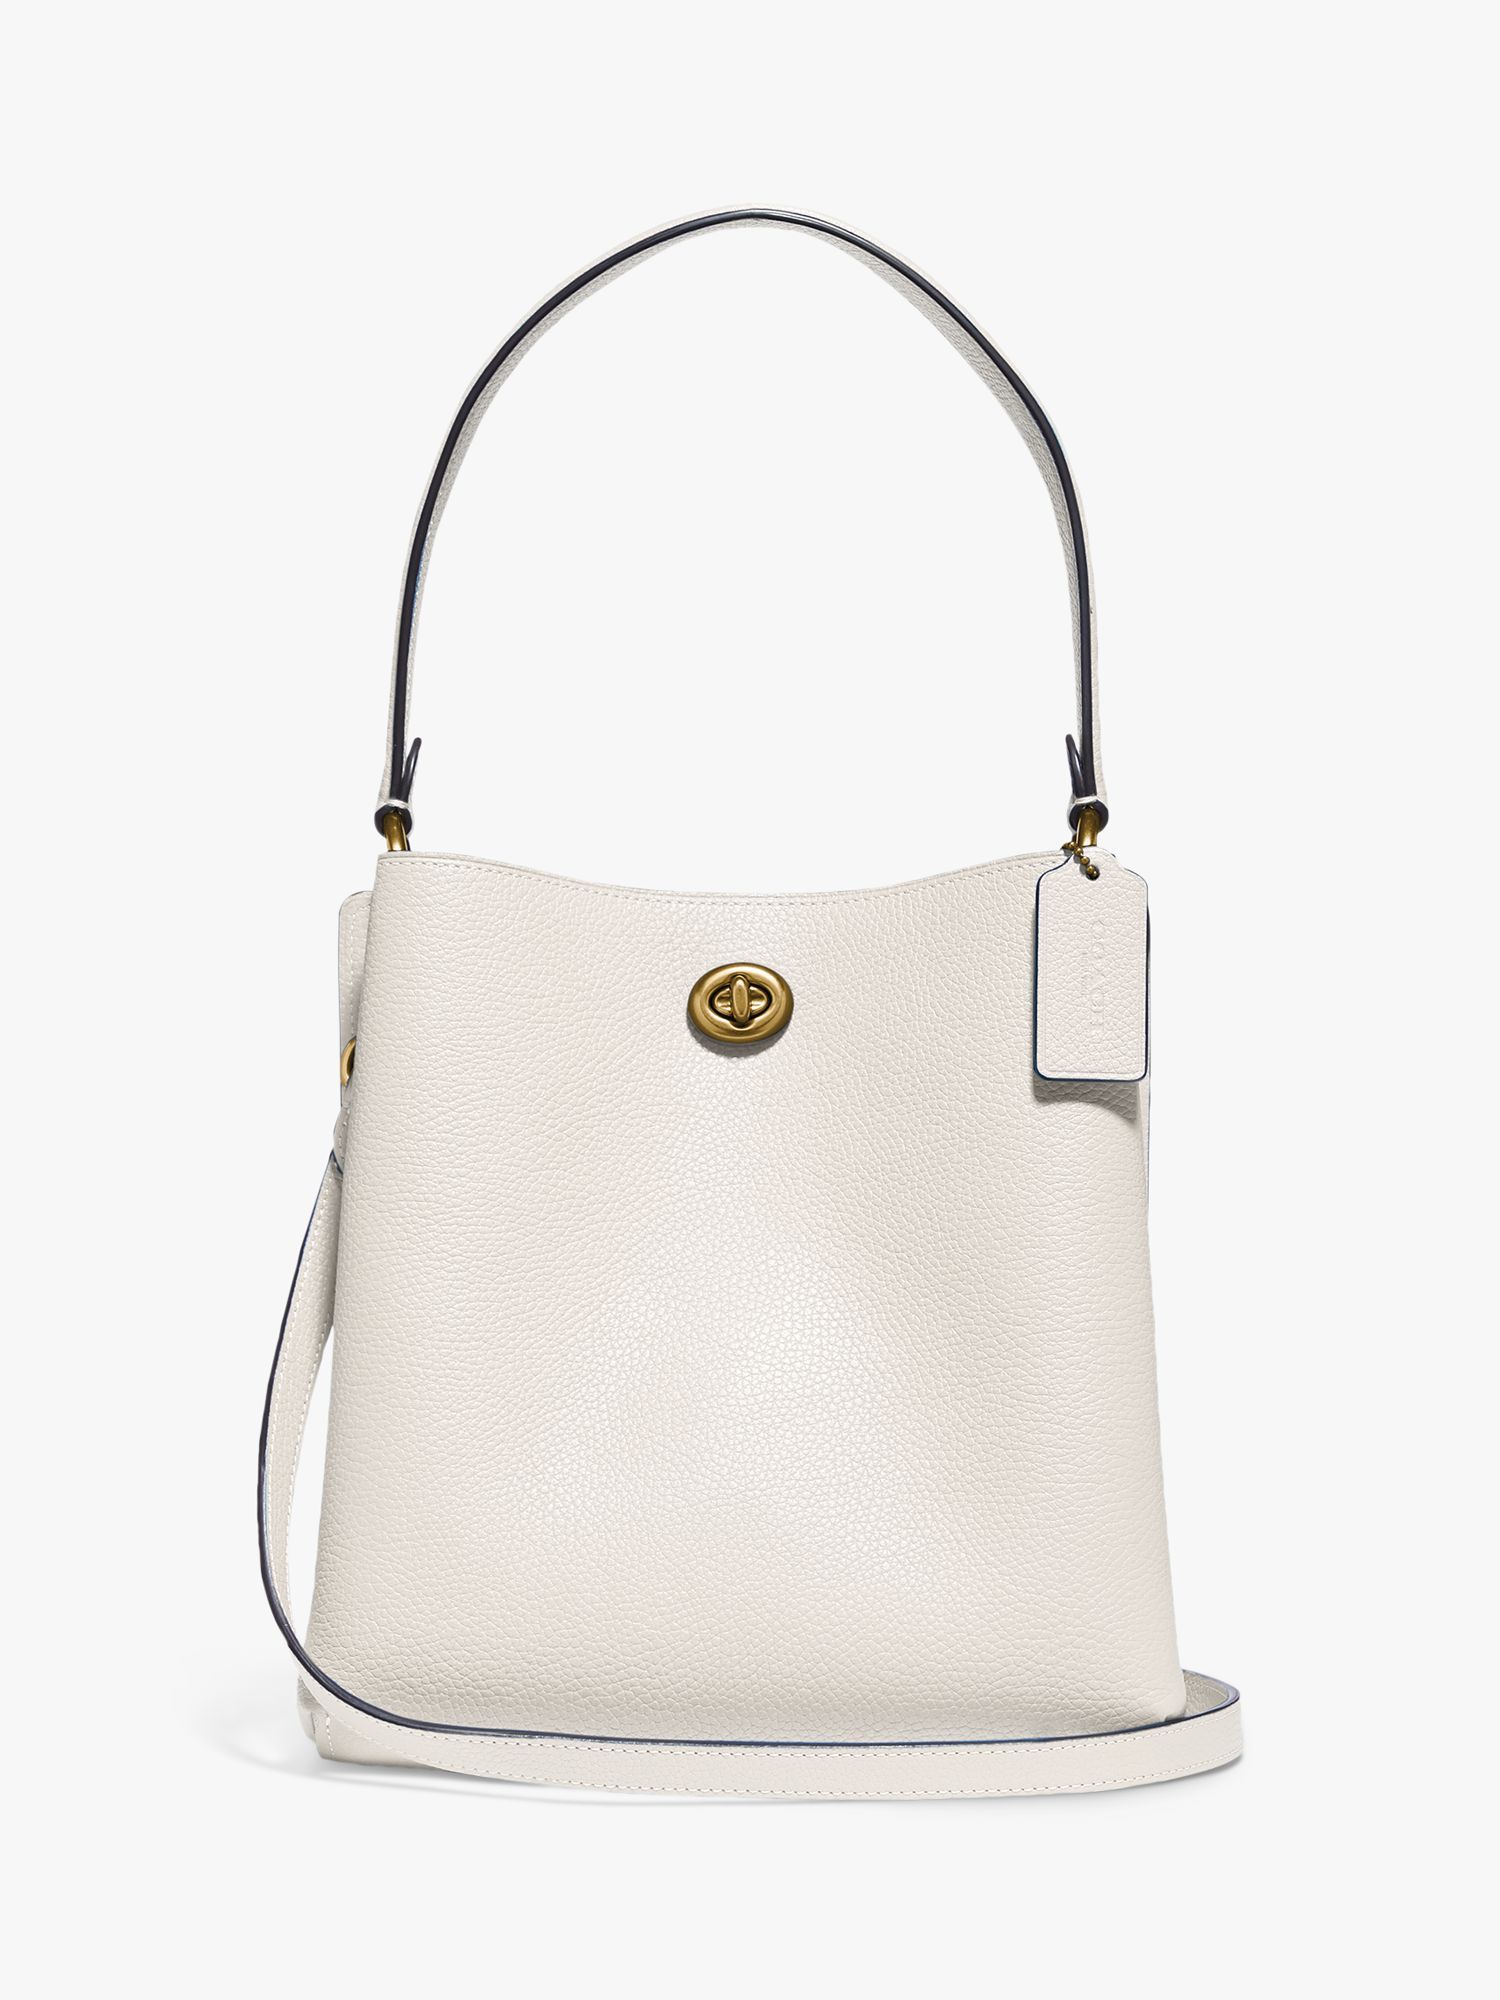 Coach Charlie 21 Leather Bucket Bag, Chalk at John Lewis & Partners